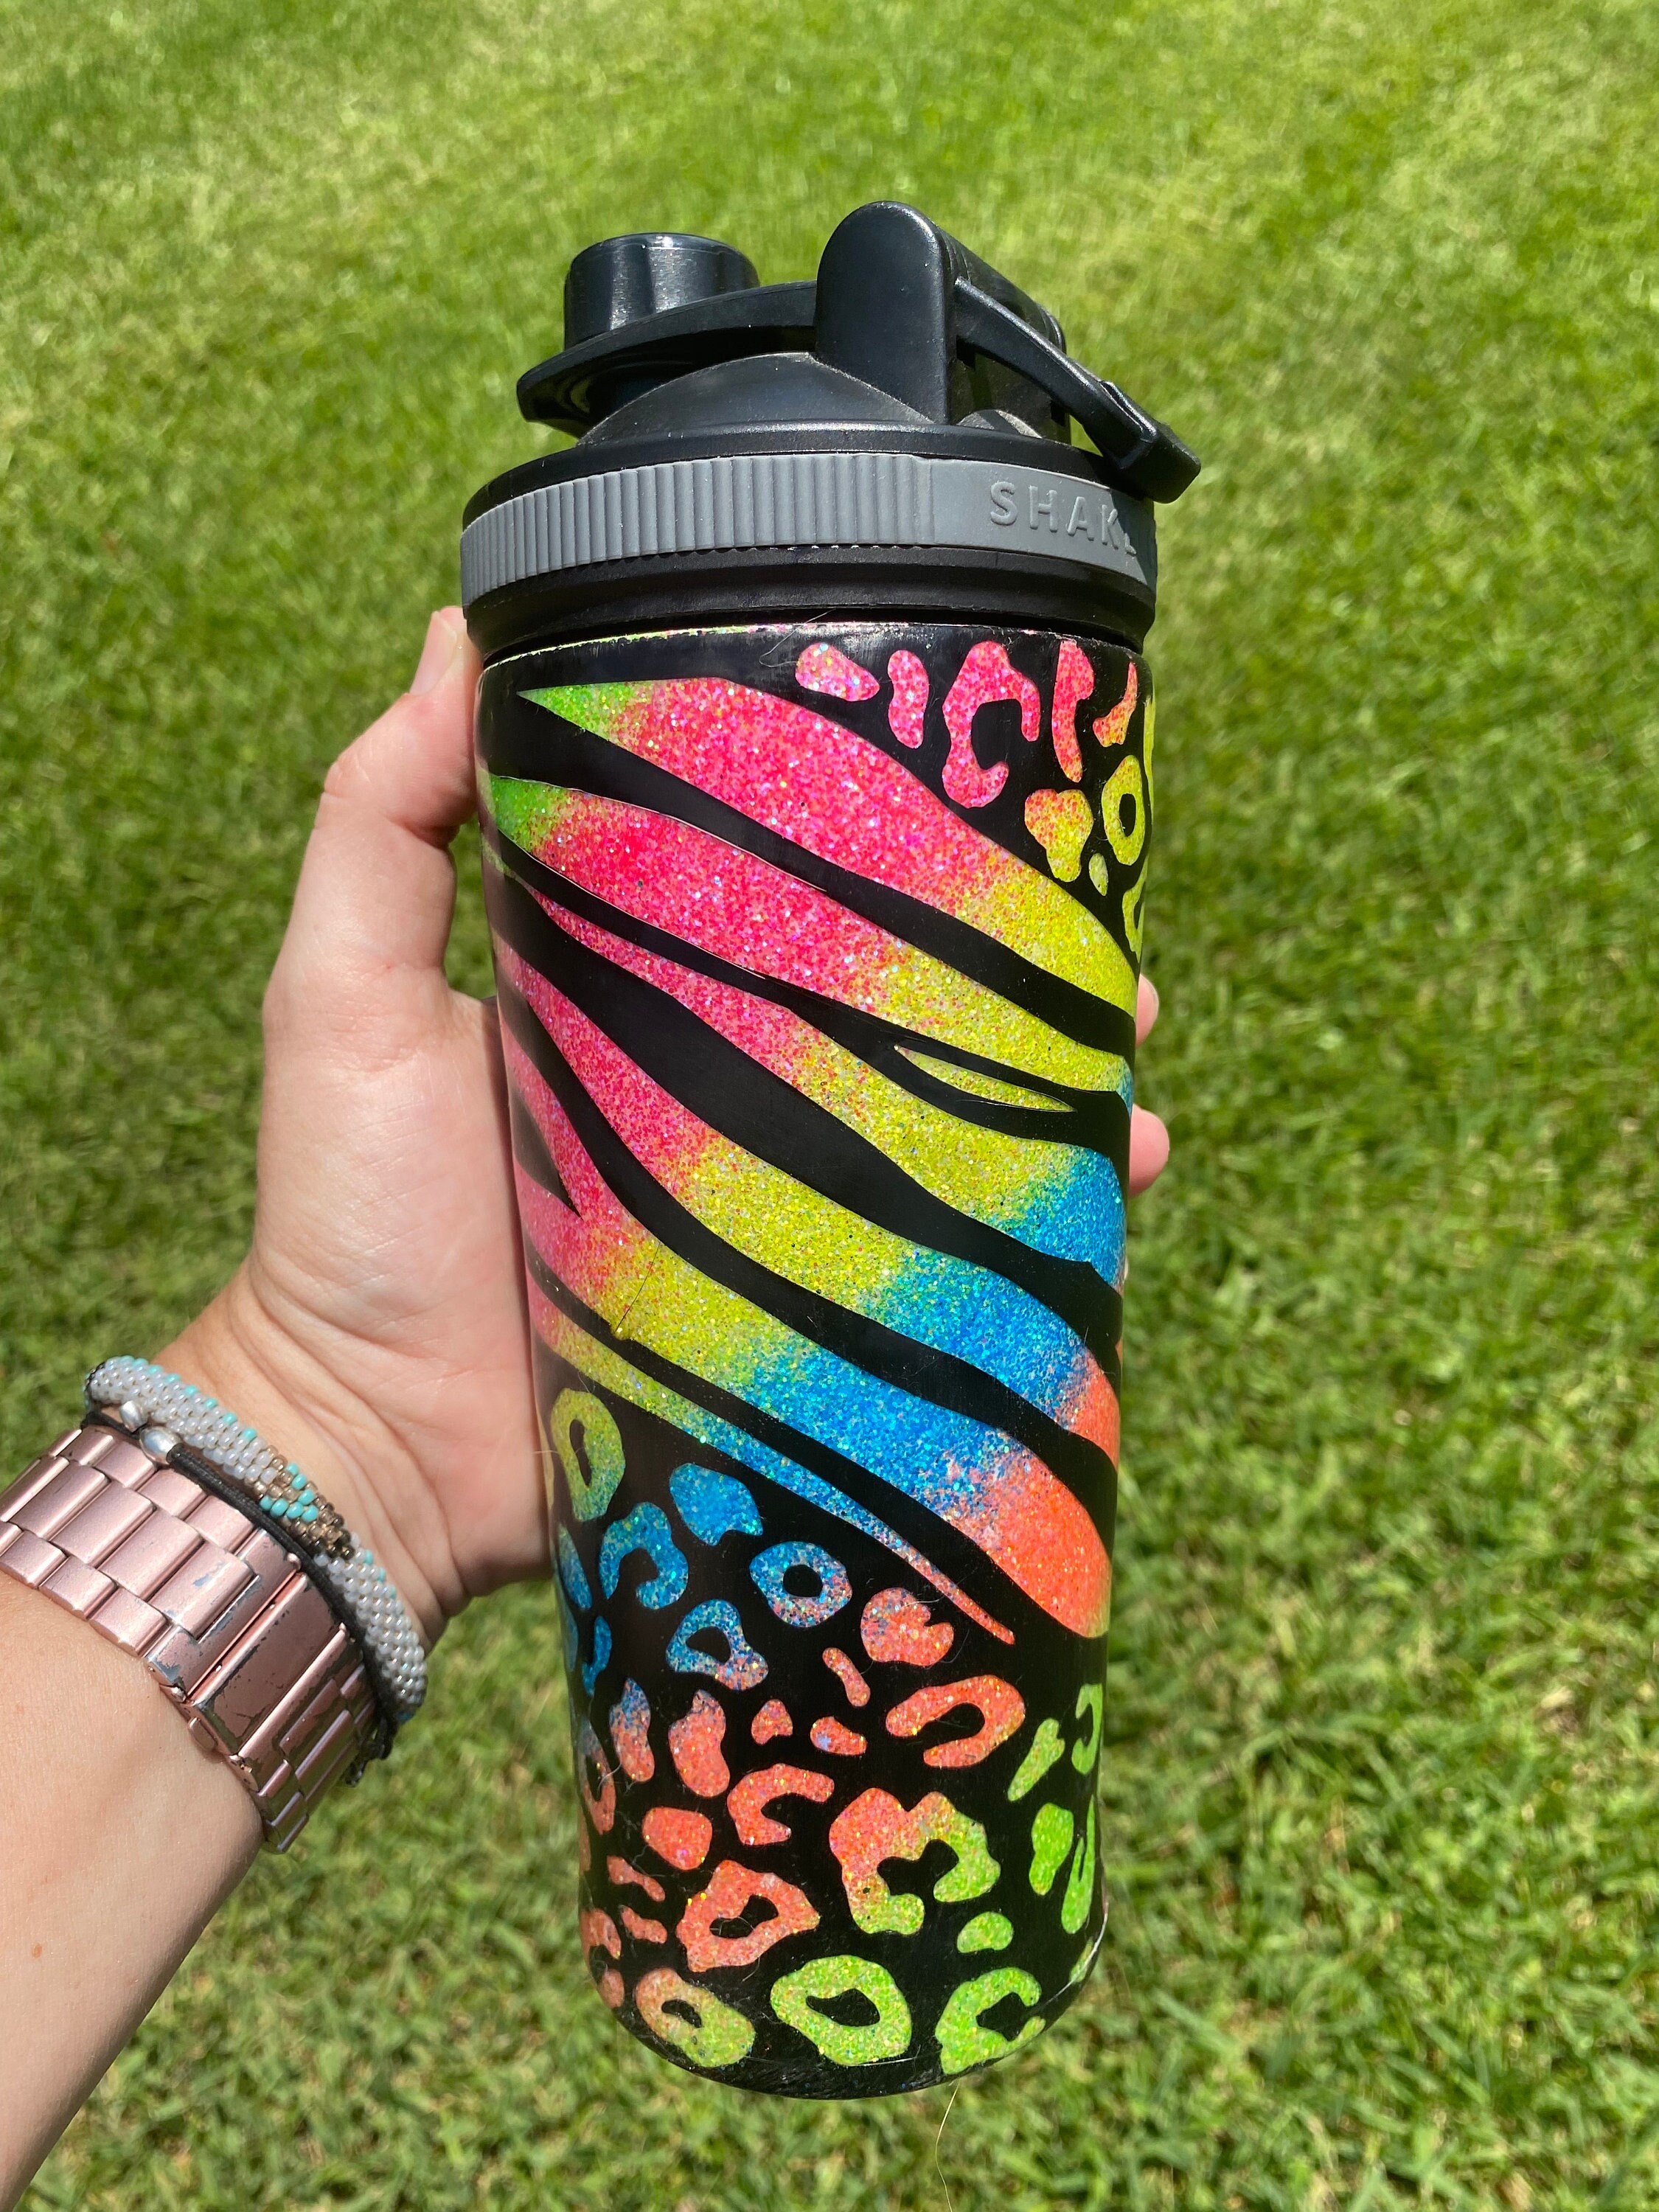 1pc Multicolor Fitness Shaker Cup Sports Water Bottle